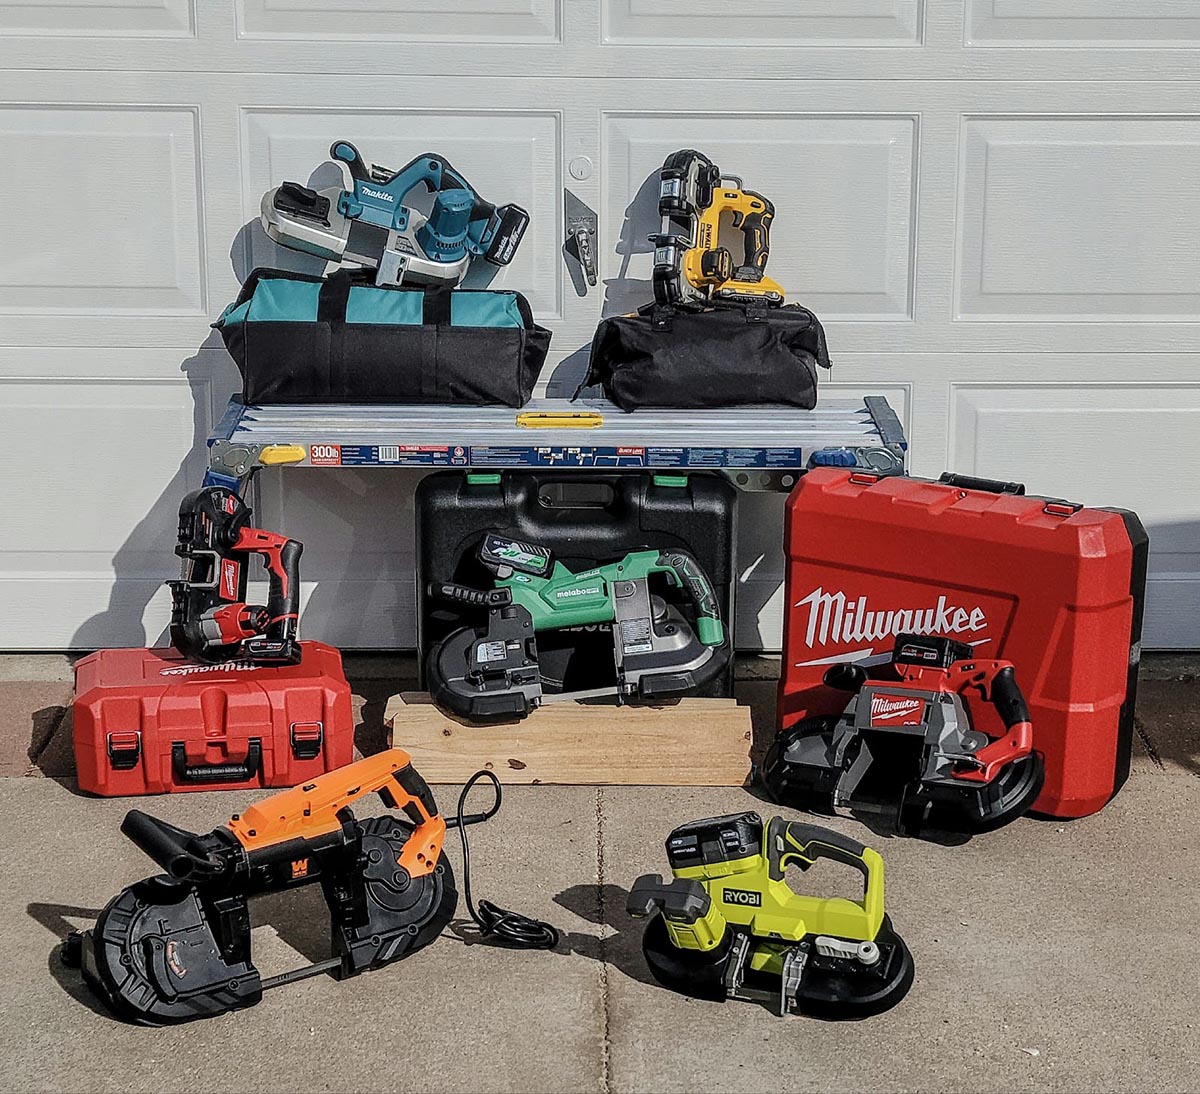 A group of the Best Portable Band Saws in front of a garage door before testing.